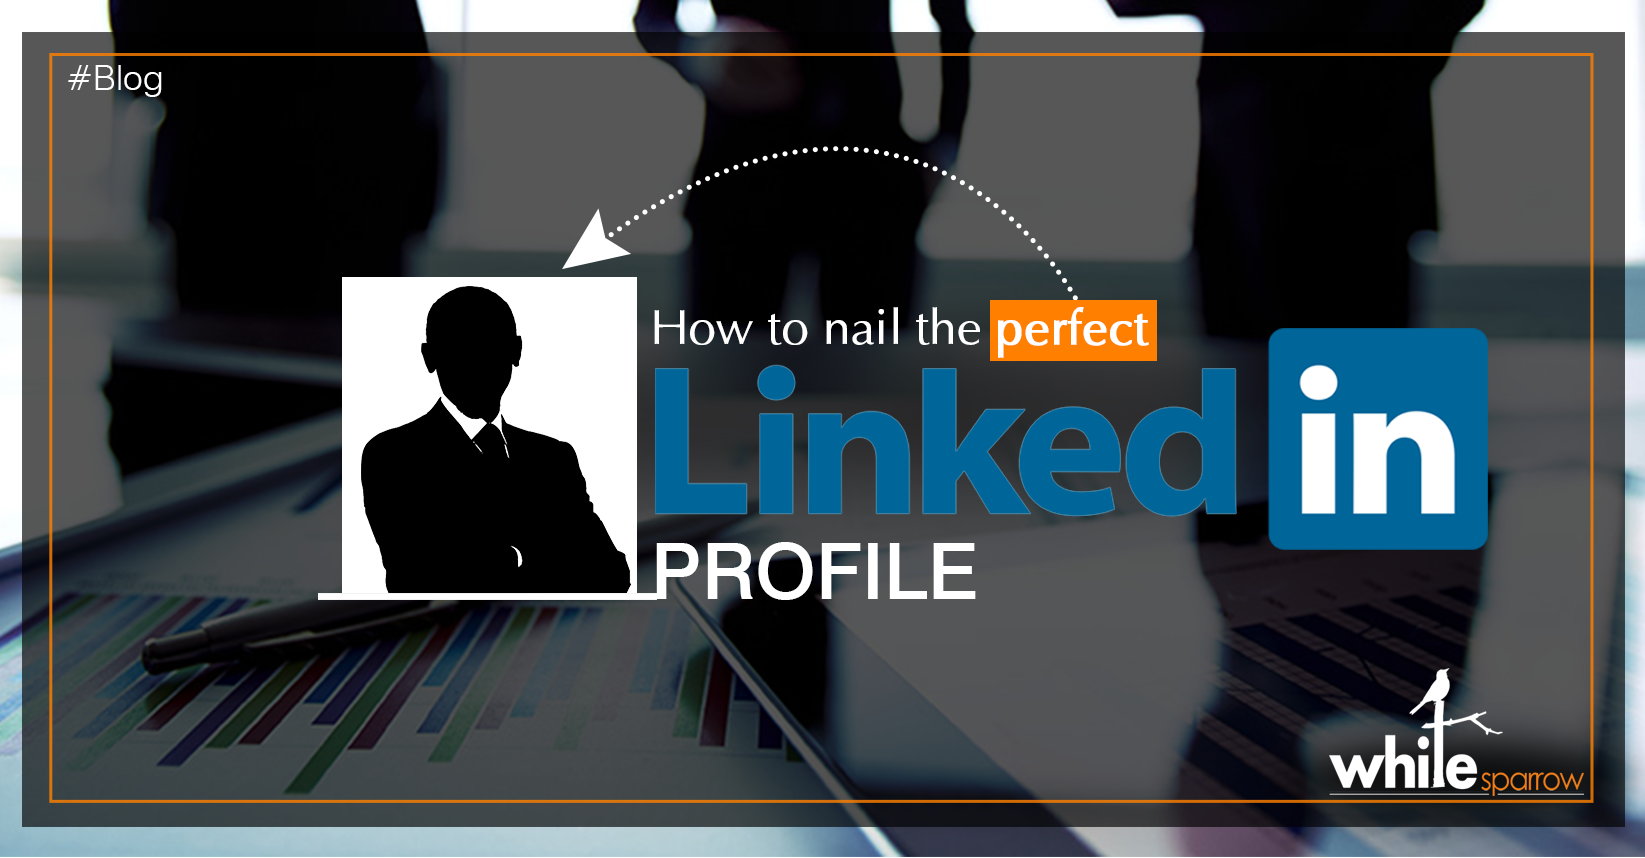 How to nail the perfect LinkedIn profile